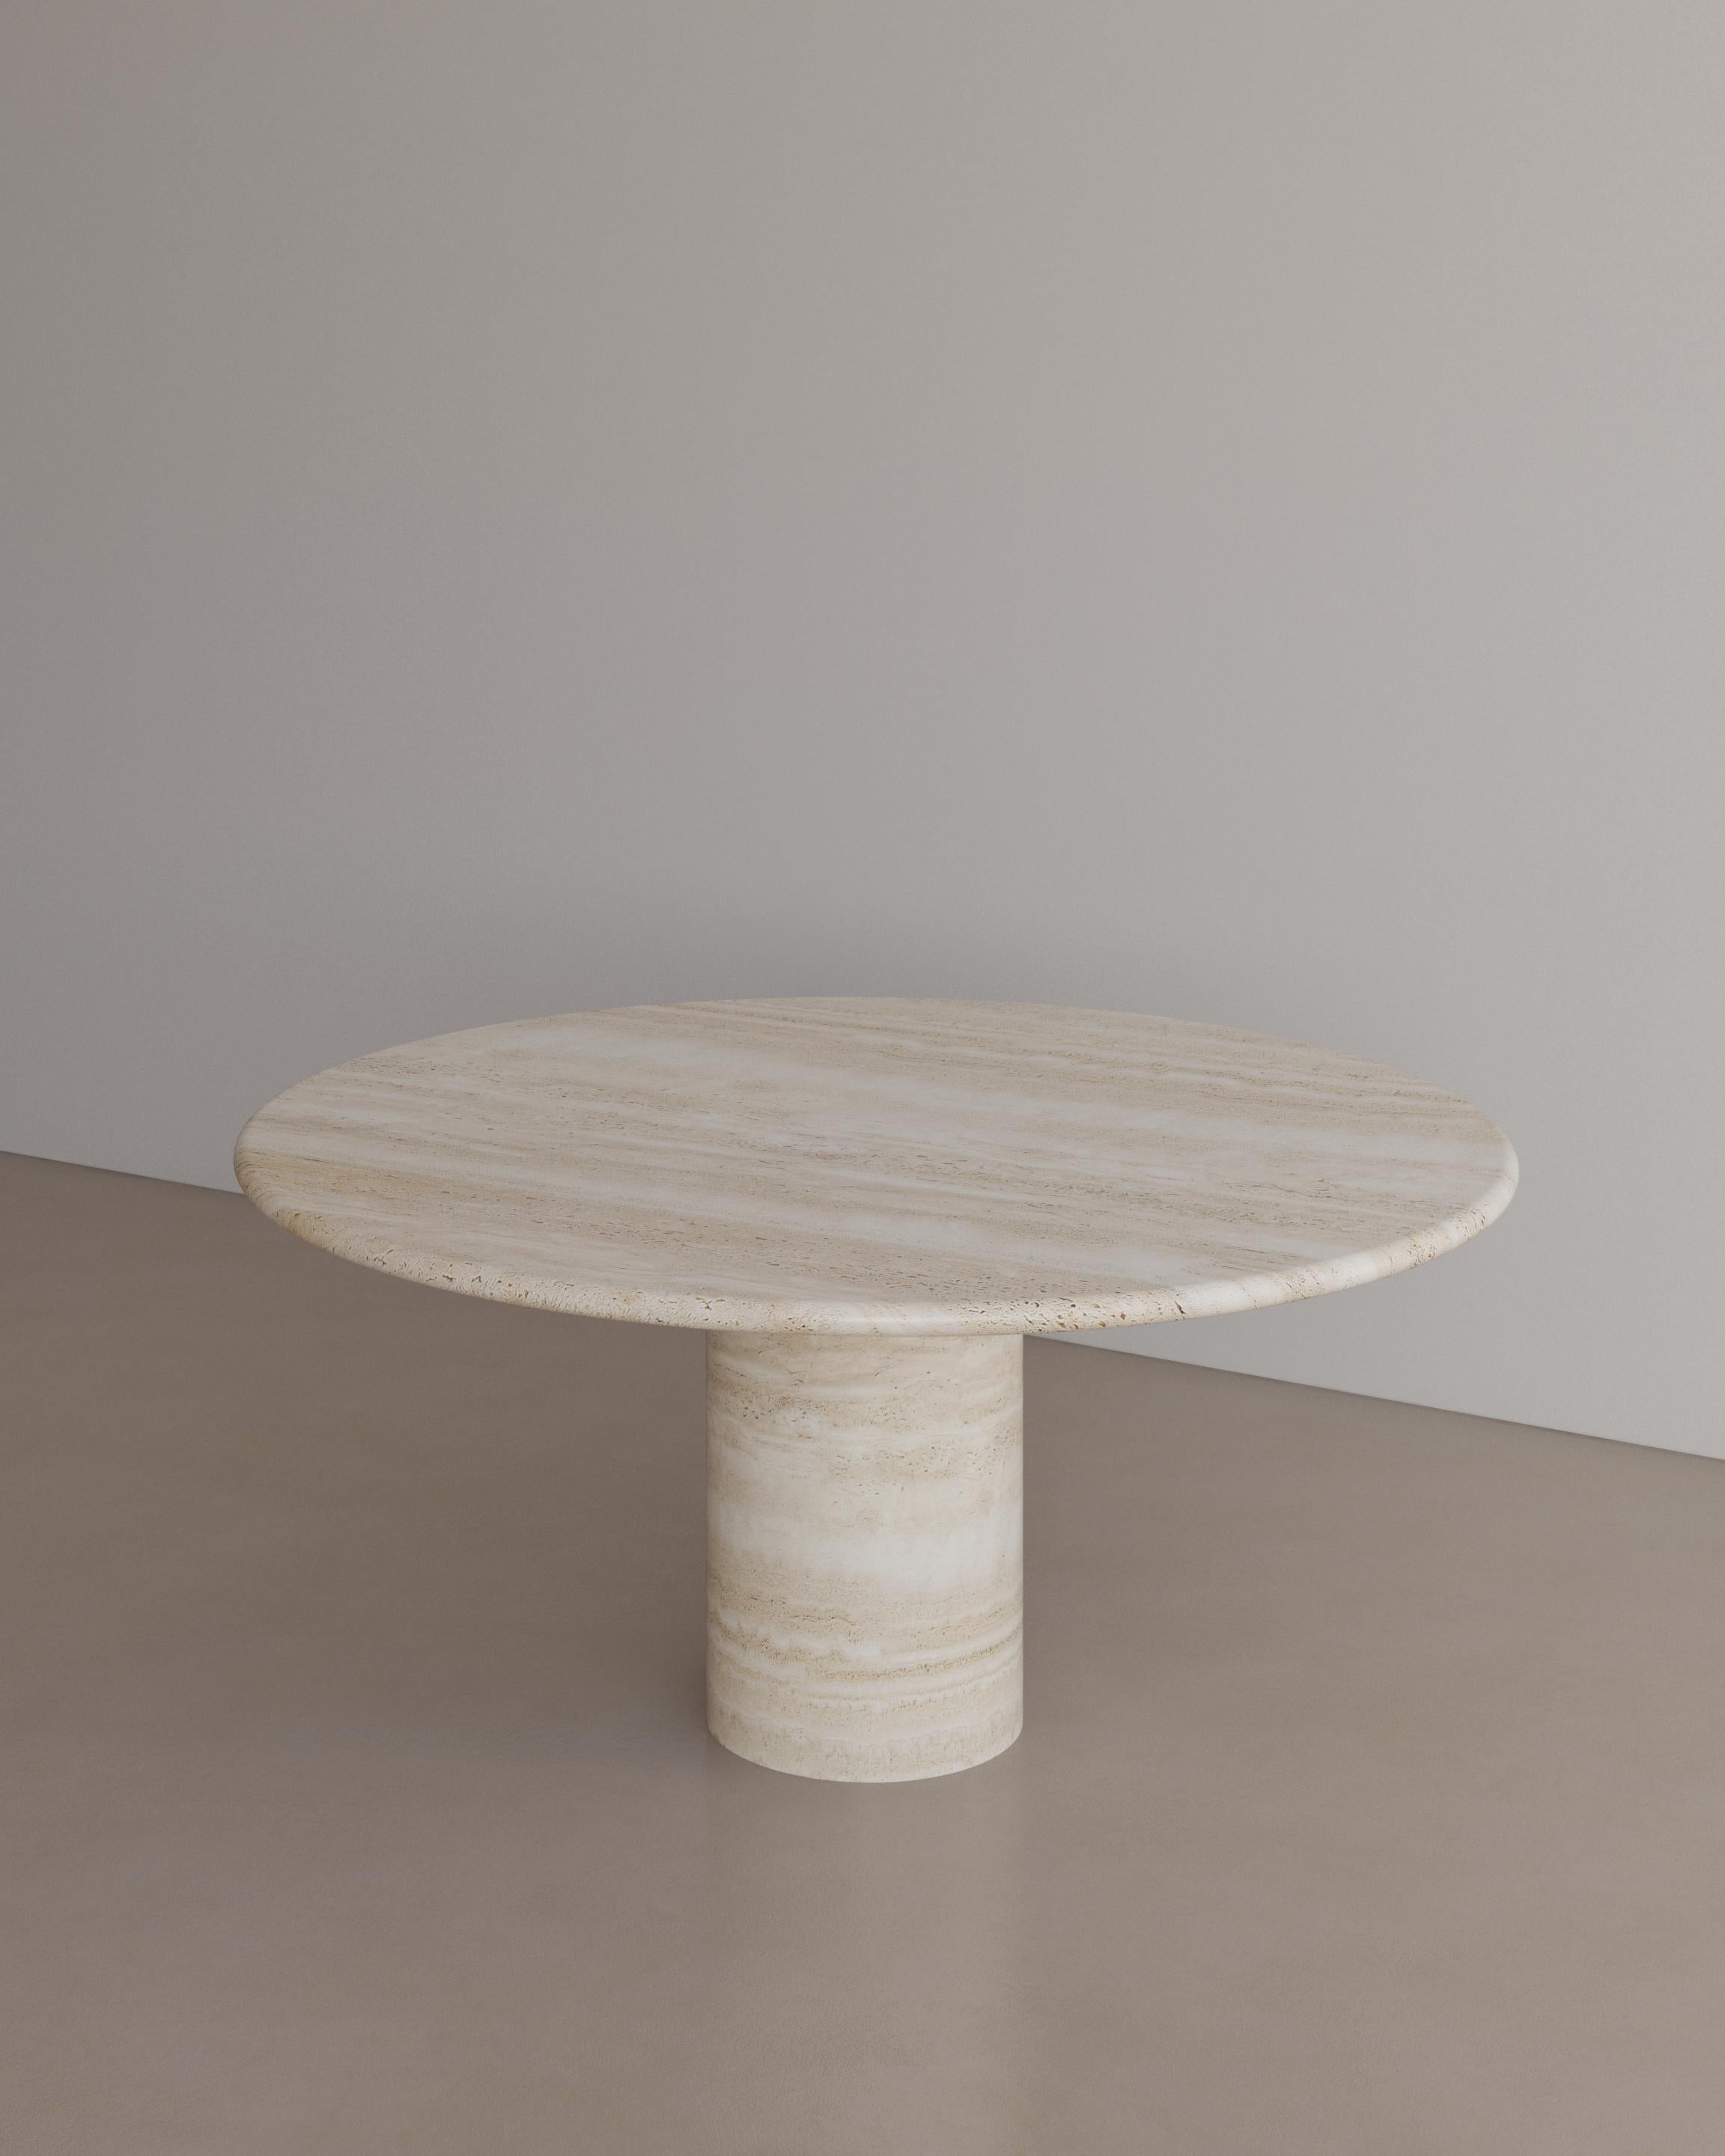 The Voyage Dining Table I in Nude Travertine by The Essentialist celebrates the simple pleasures that define life and replenish the soul through harnessing essential form. Envisioned as an ode to historical elegance, captured through a modern lens